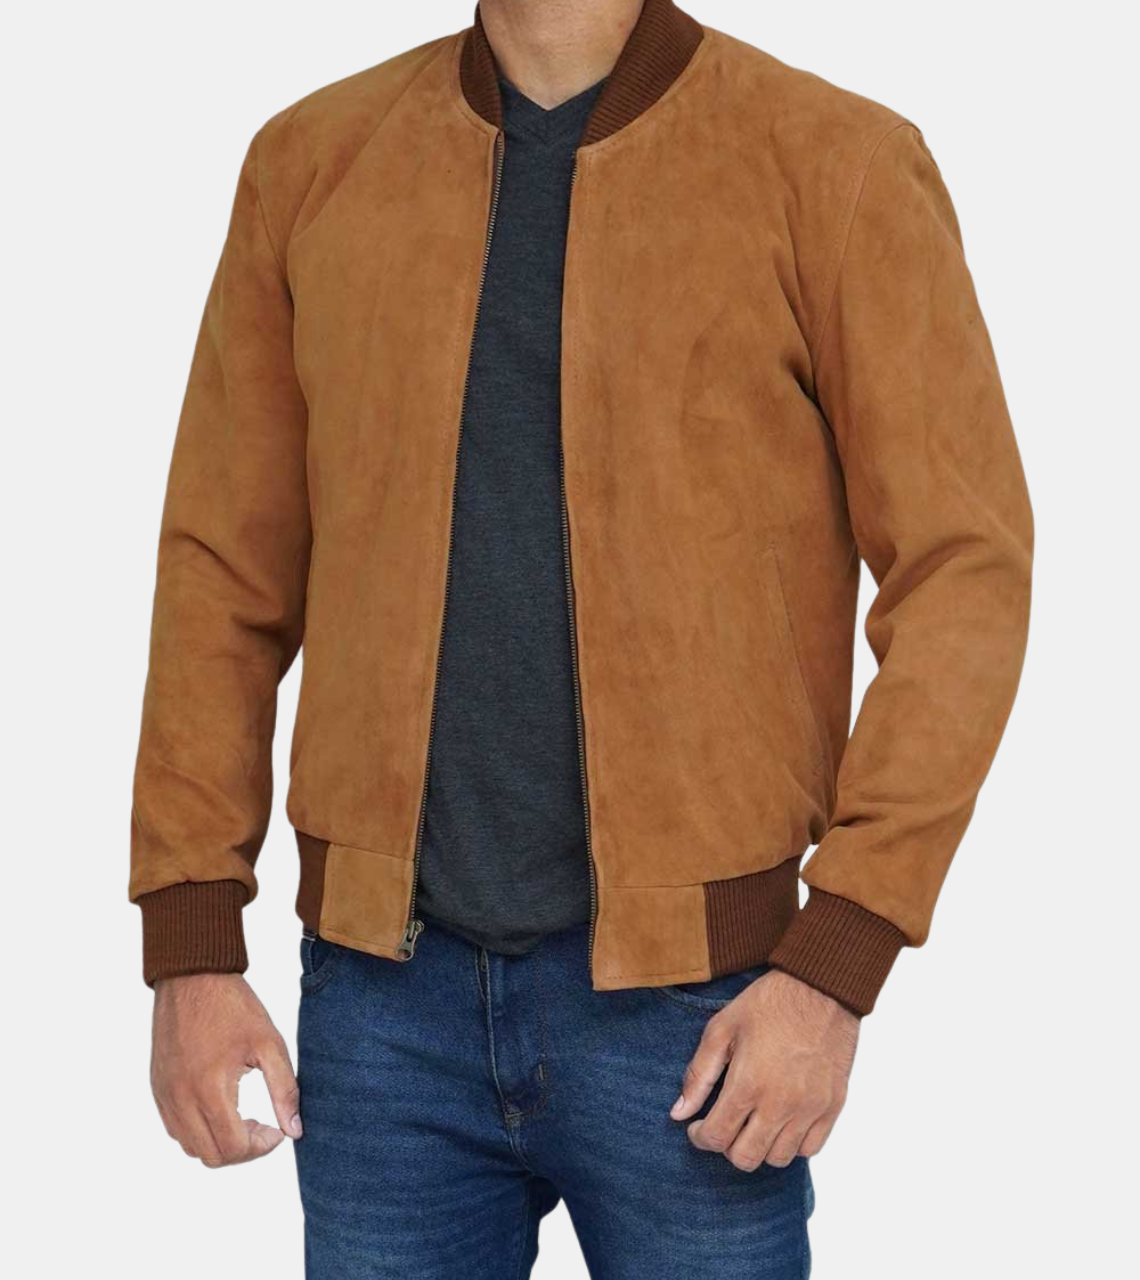  Brown Suede Bomber Leather Jacket